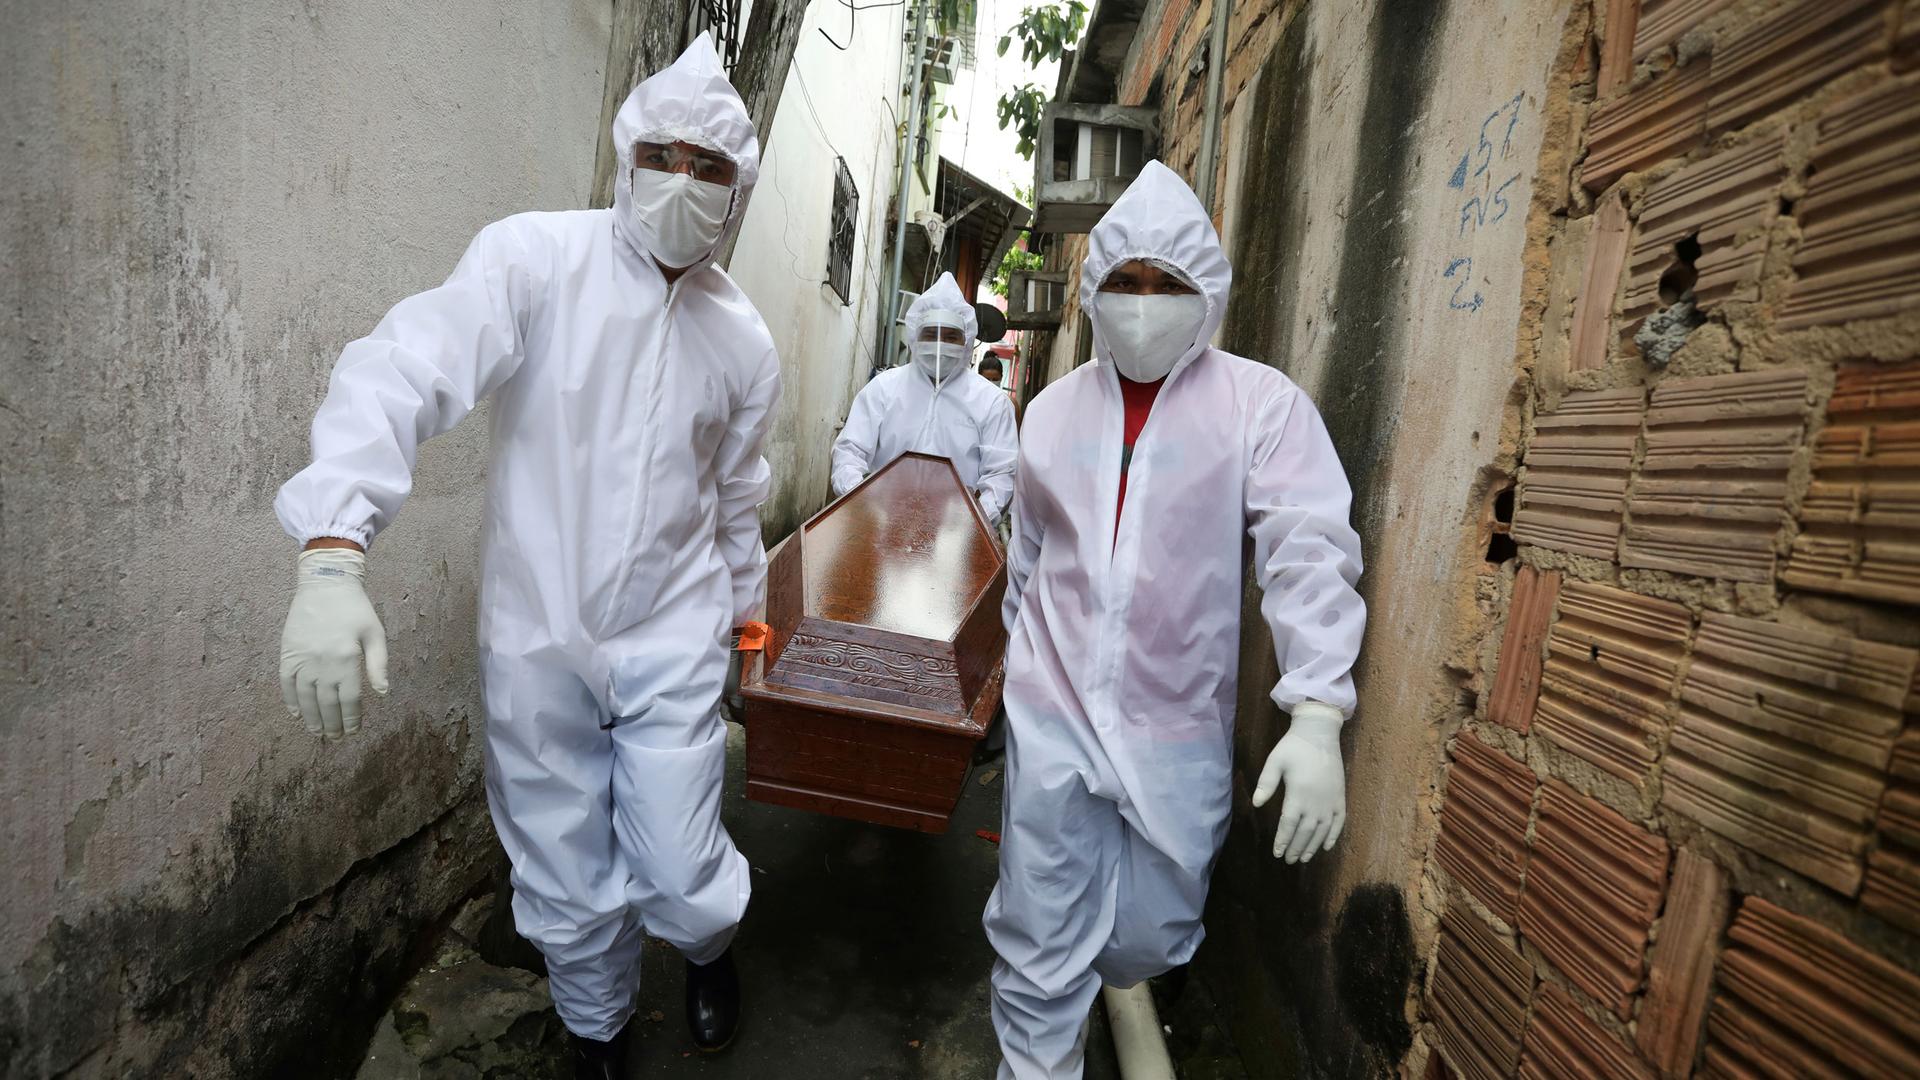 Three workers are shown wearing white medical protective clothing and masks while carrying a wooden coffing in a small alley. 